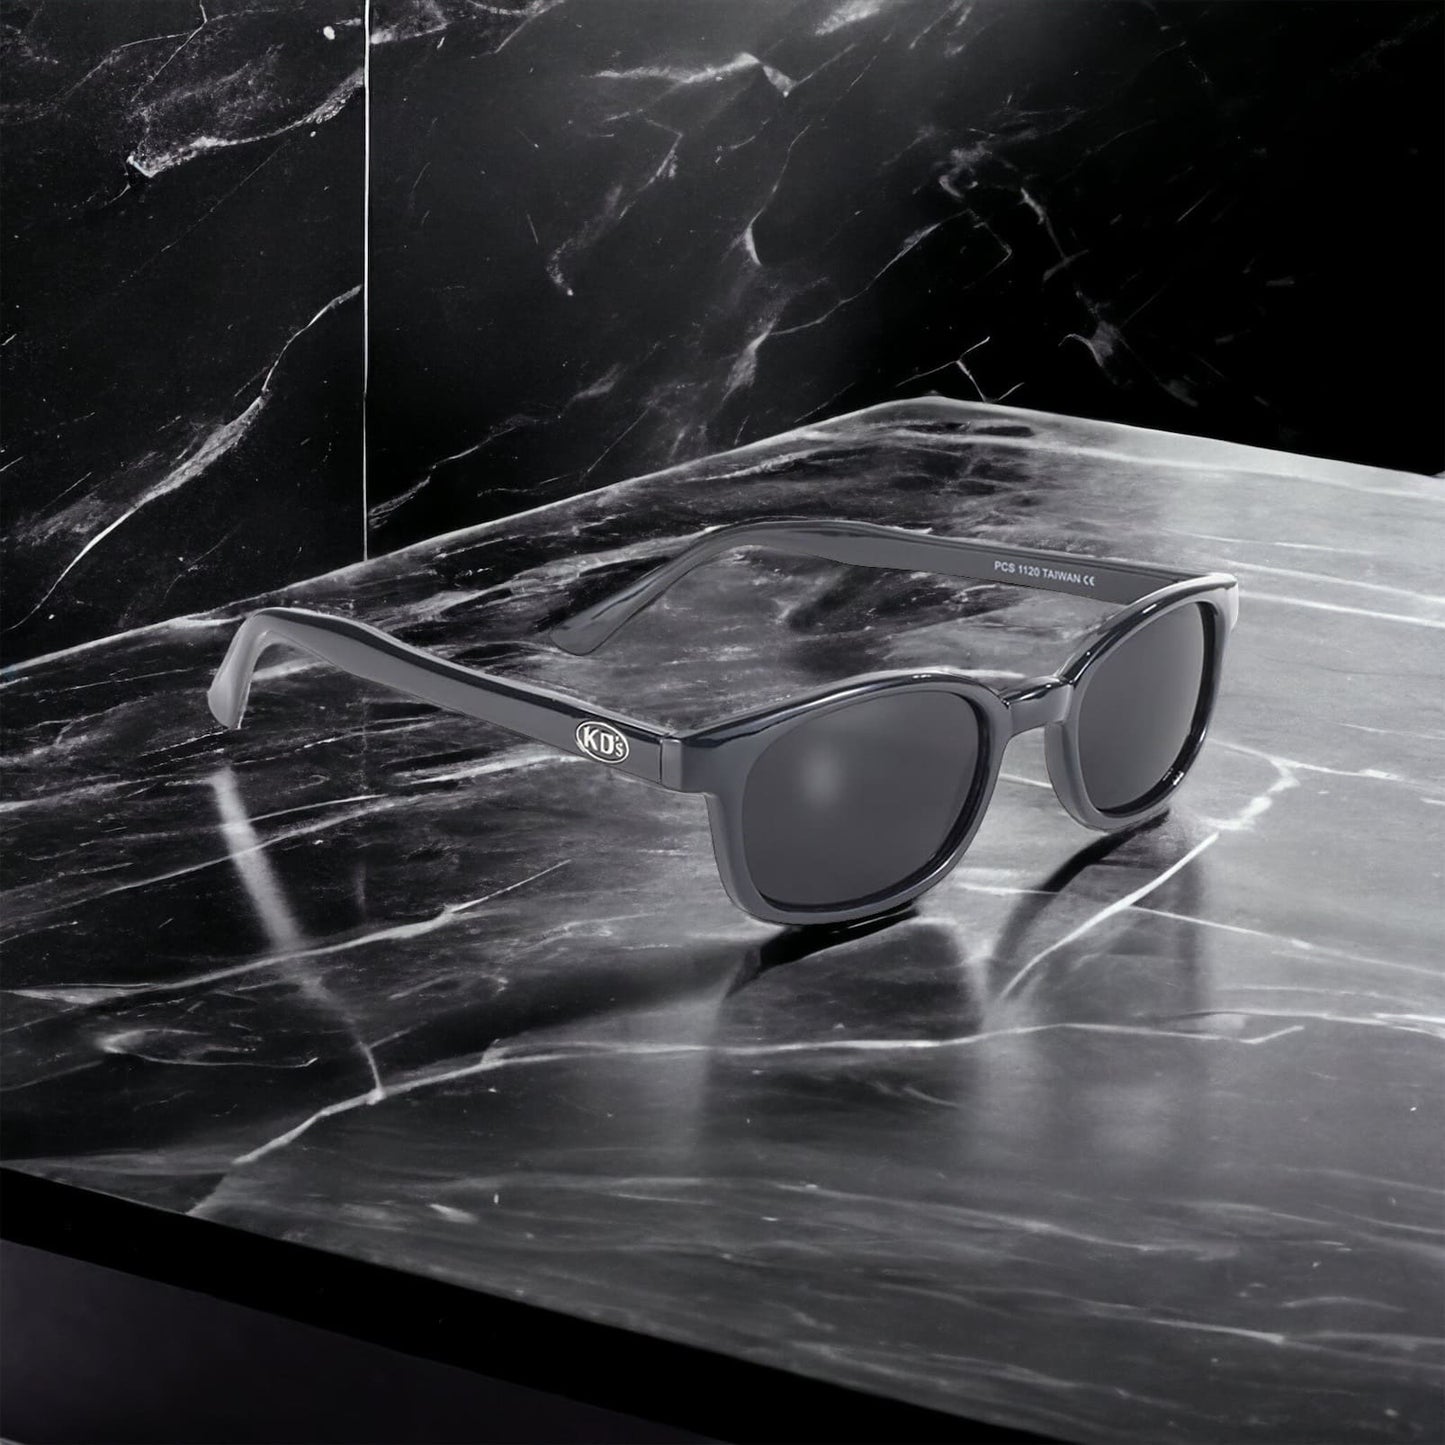 X-KD's 1120 sunglasses with dark grey lenses and a refined black frame placed on a black marble countertop.